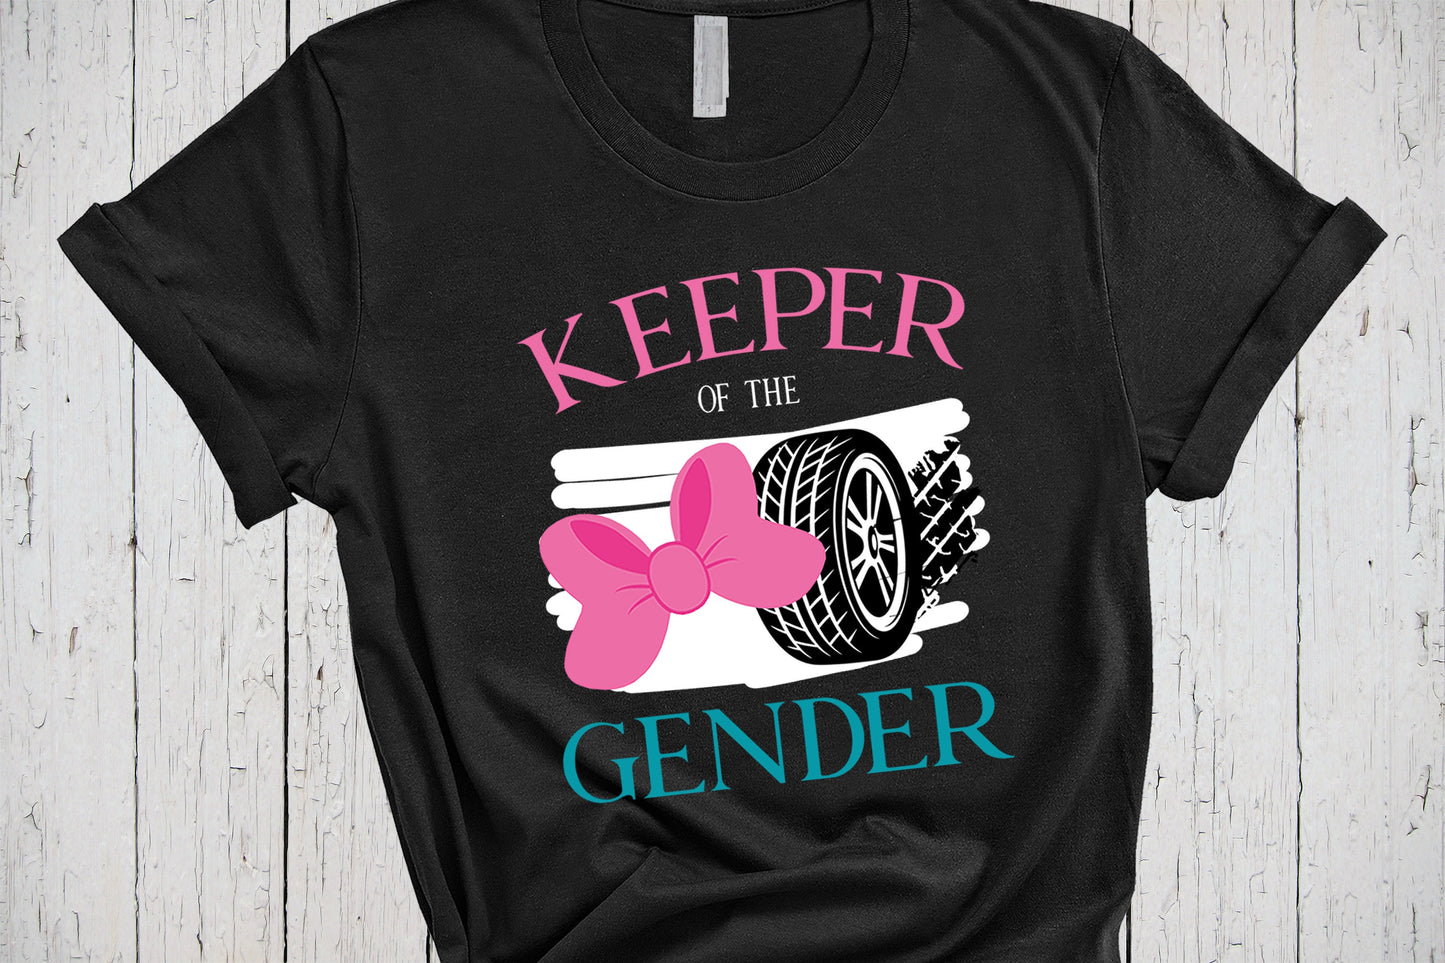 Keeper Of The Gender Shirt, Team Bows, Team Burn Outs, Pink or Blue Shirt, Gender Party Shirts, Gender Reveal Shirts, Pregnancy Announcement